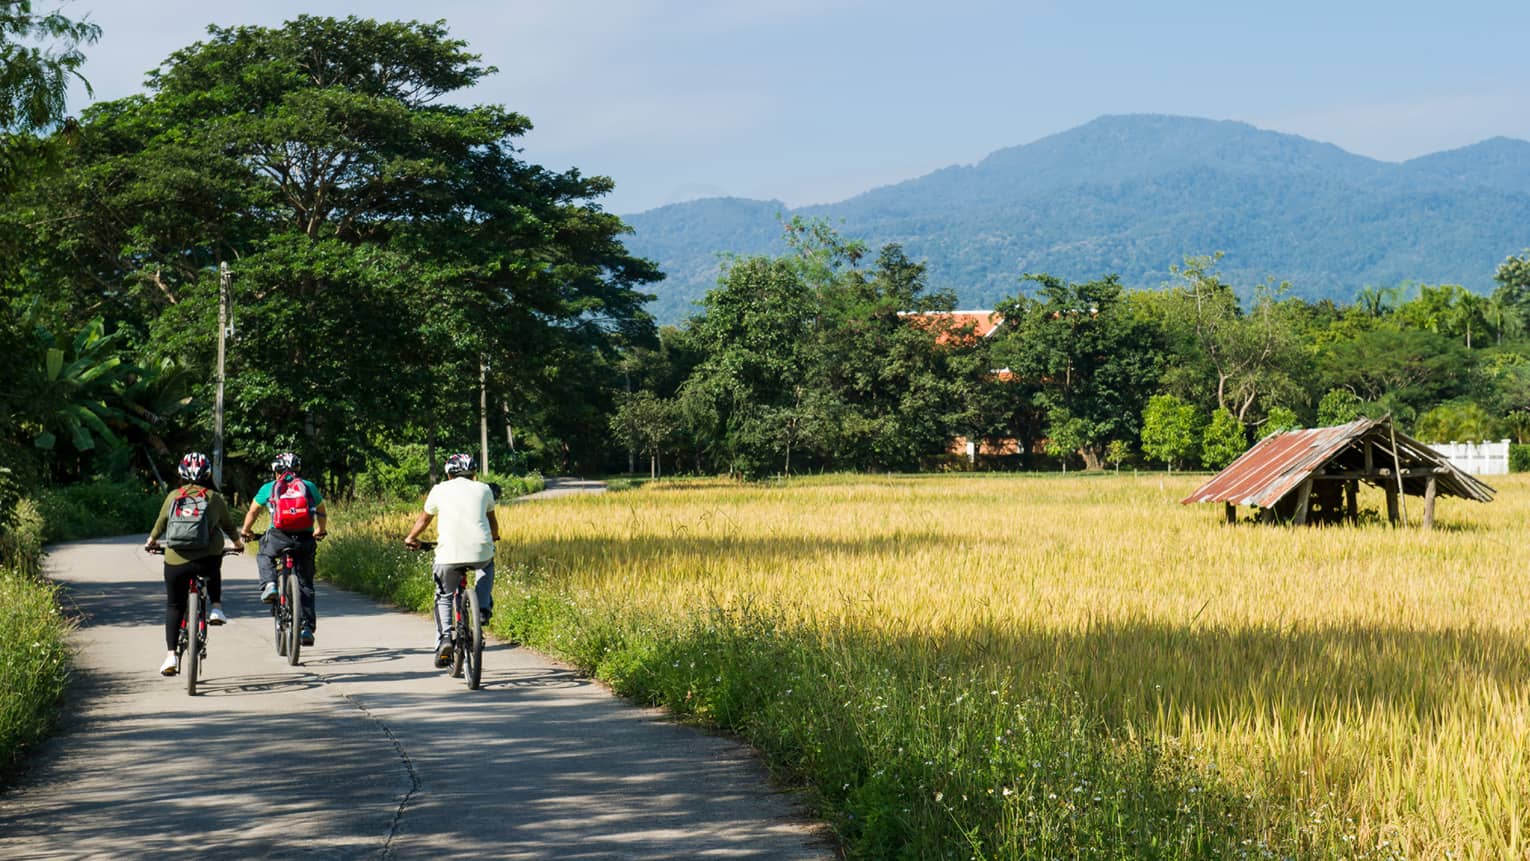 Three cyclists ride down a rural road surrounded by lush greenery and golden fields, with mountains in the background and a small rustic hut to the side.